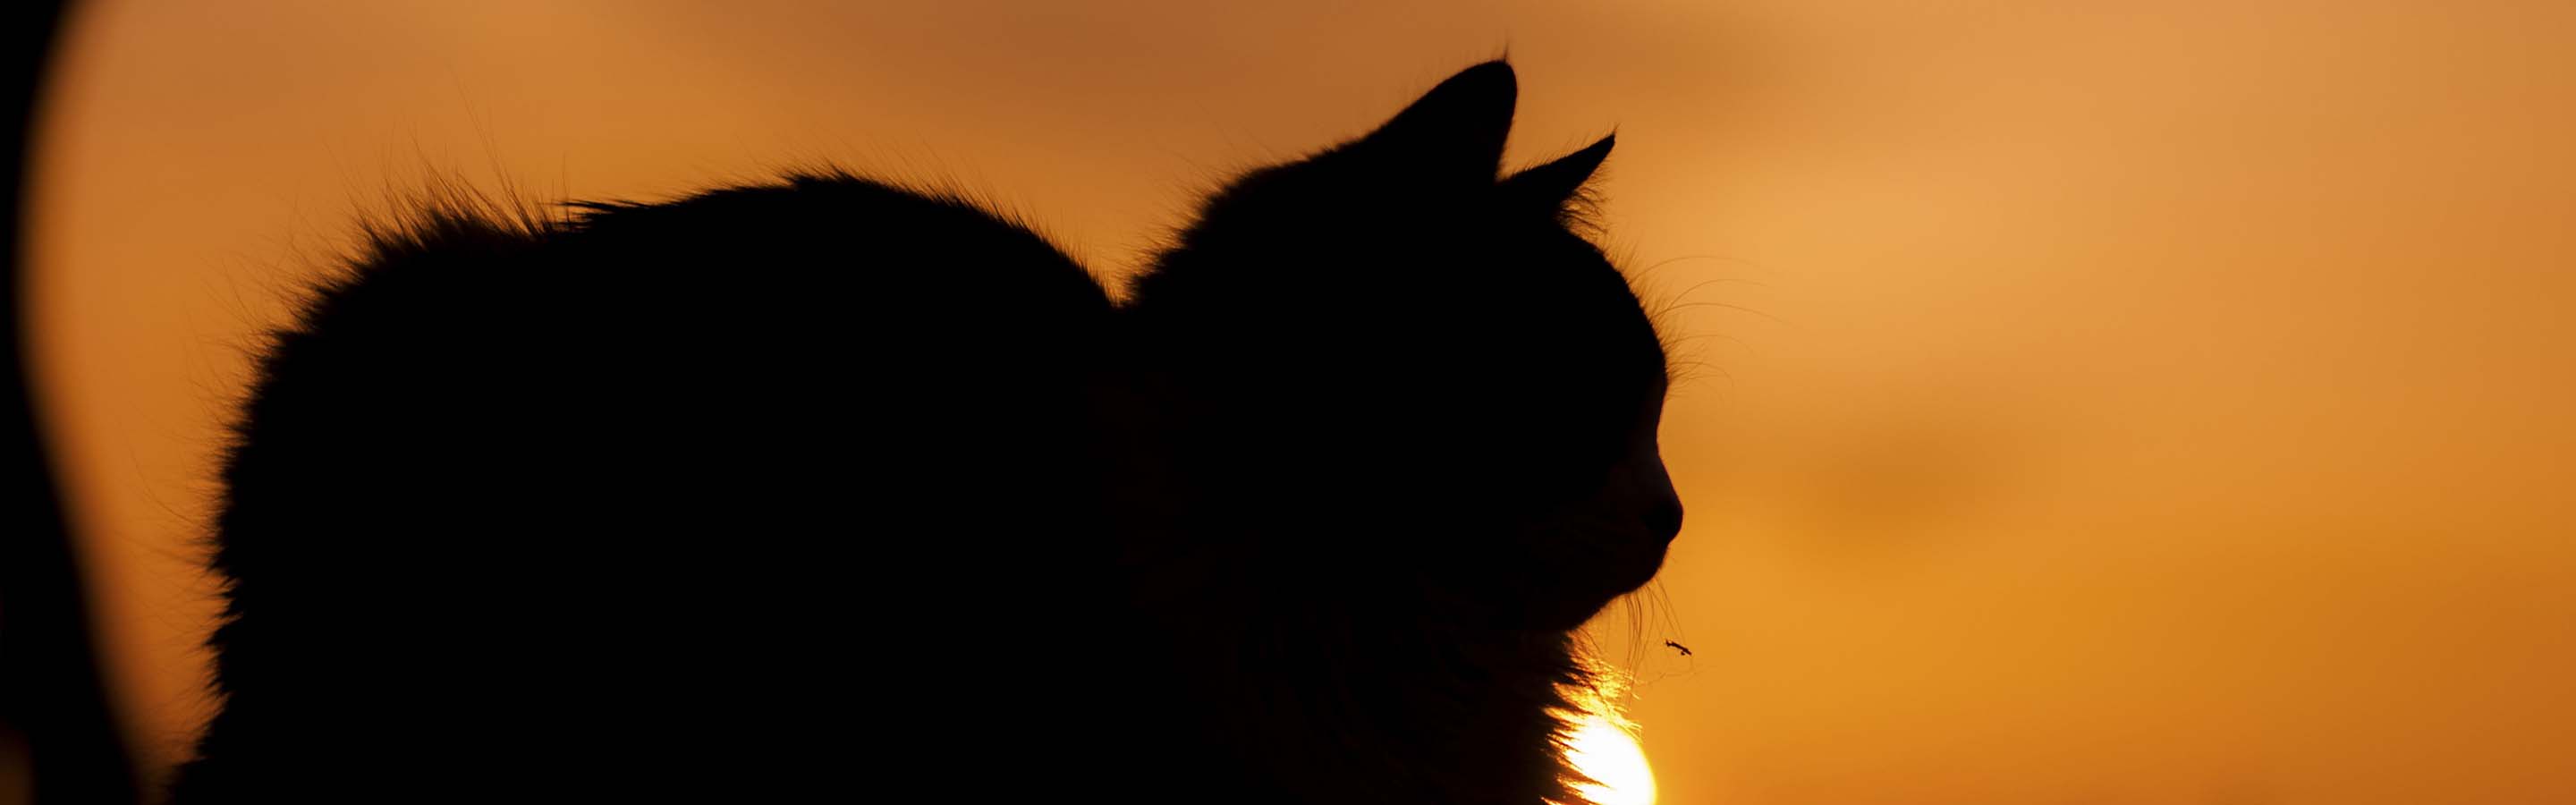 Silhouette of cat with sunset in background